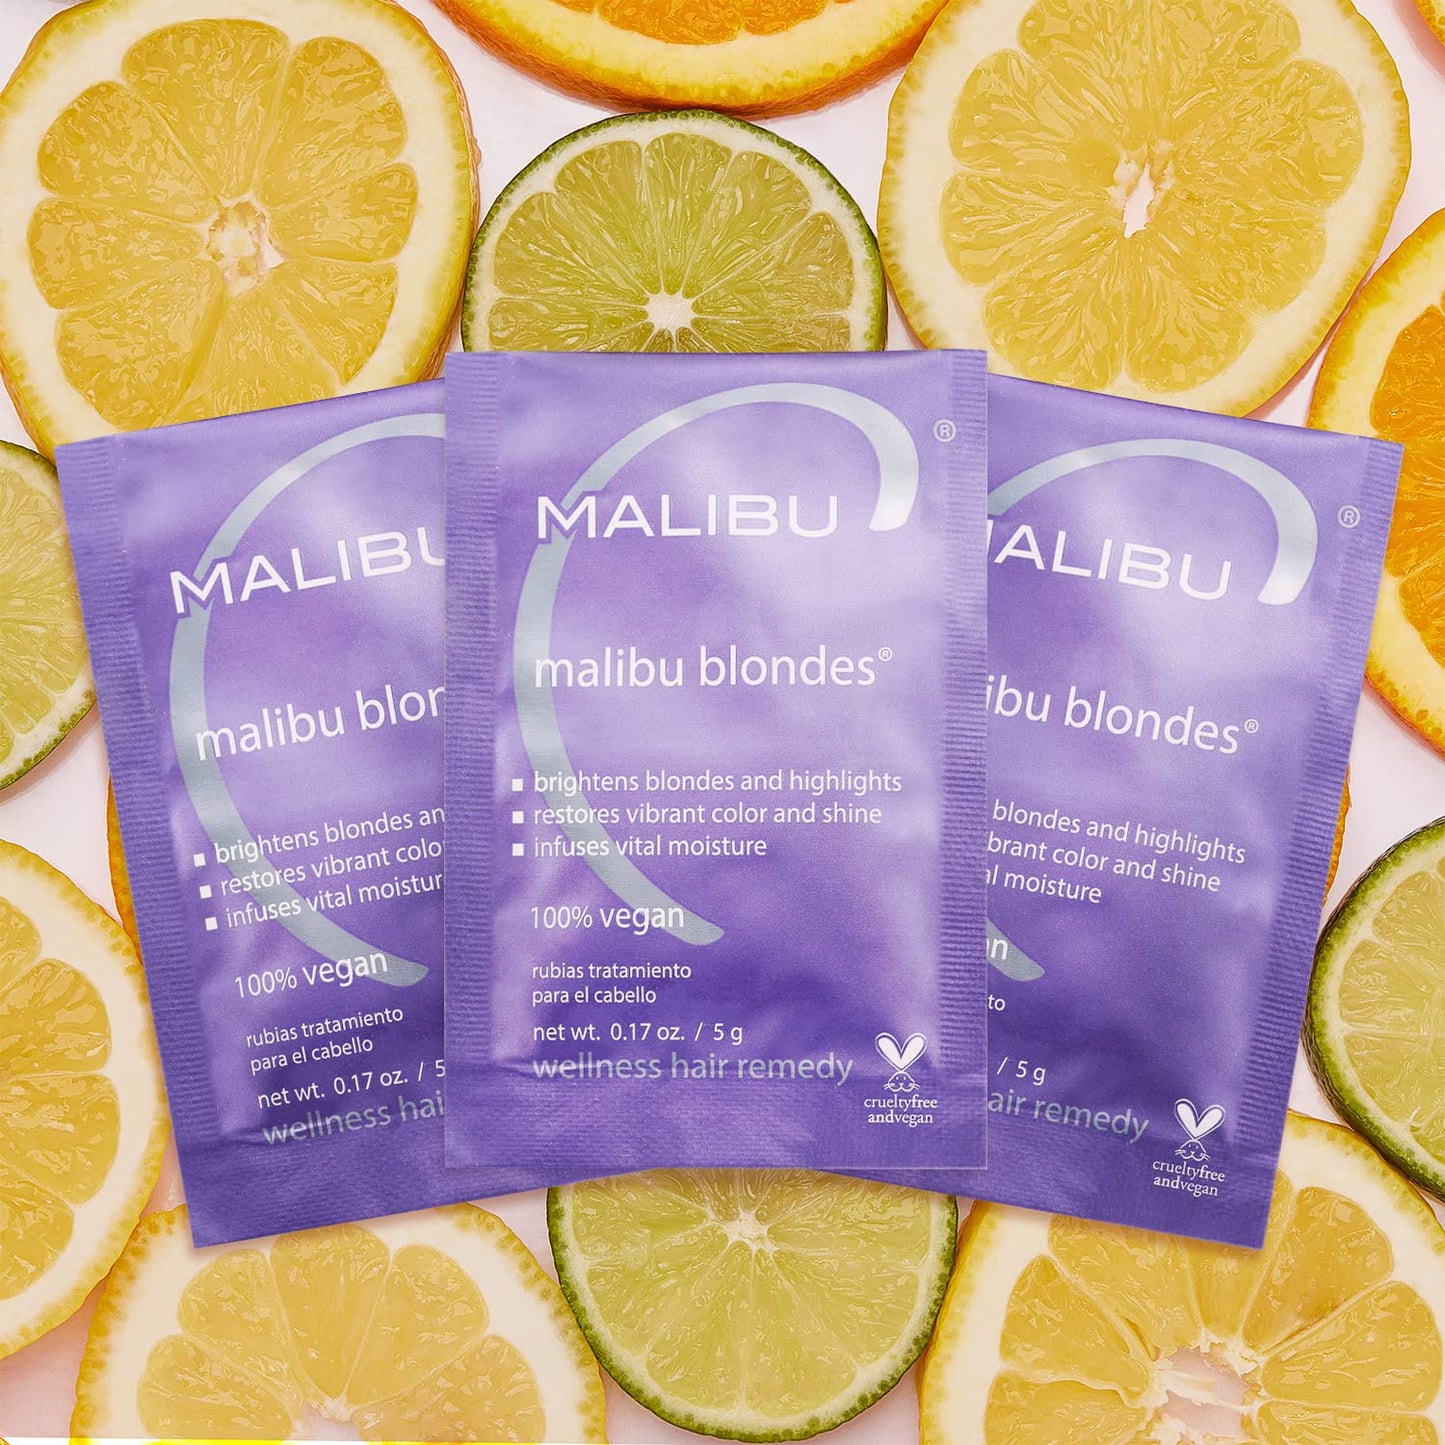 Malibu C Blondes Wellness Remedy - Removes Discoloration from Bleached, Highlighted or Natural Blonde Hair + Restores Vibrance and Shine with Vitamin C Complex (3 Packets)